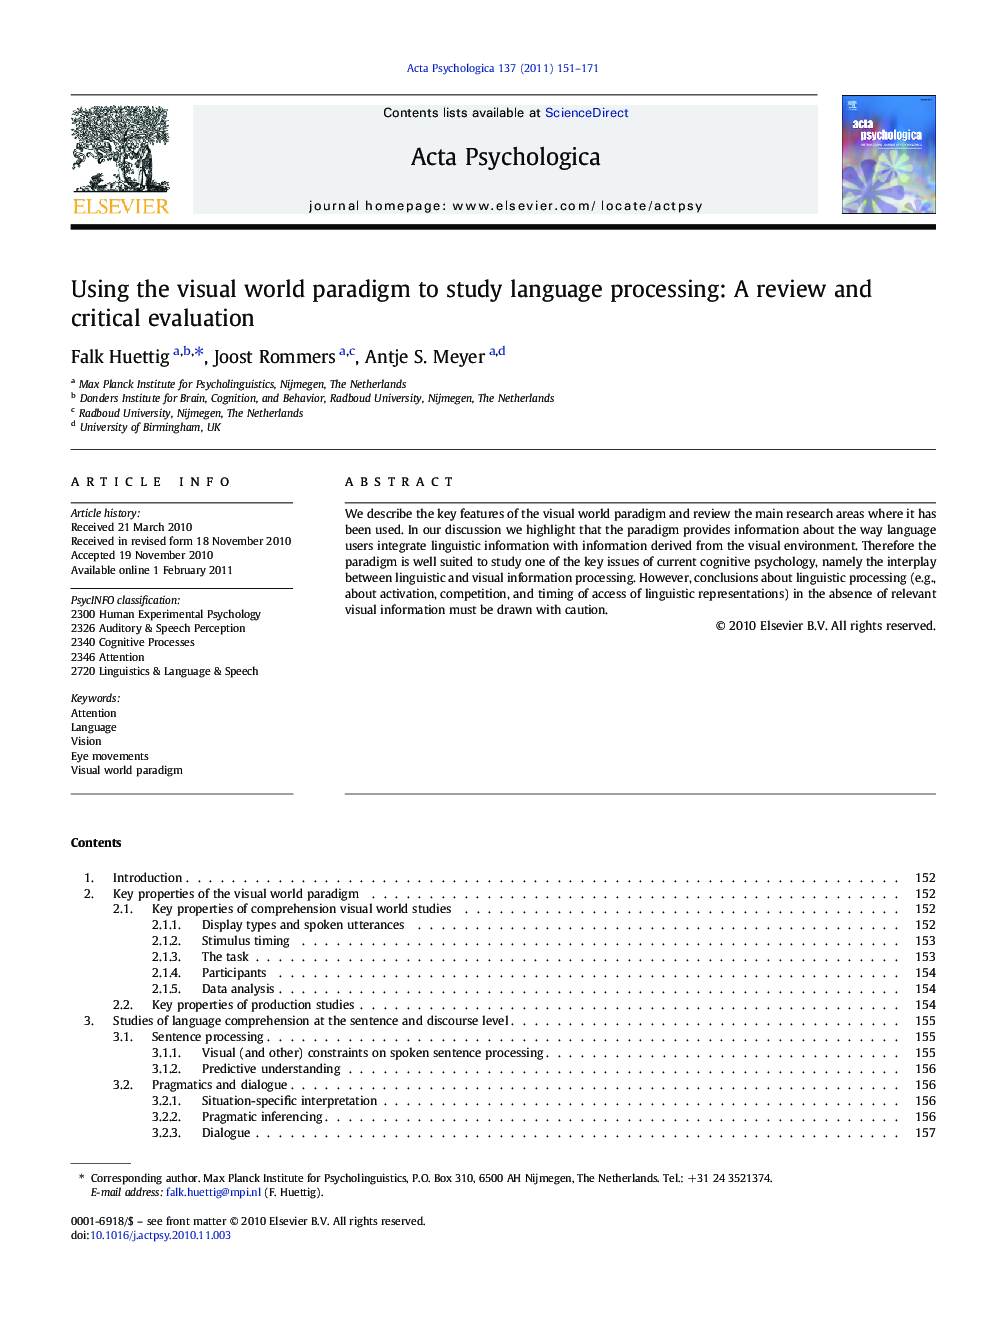 Using the visual world paradigm to study language processing: A review and critical evaluation